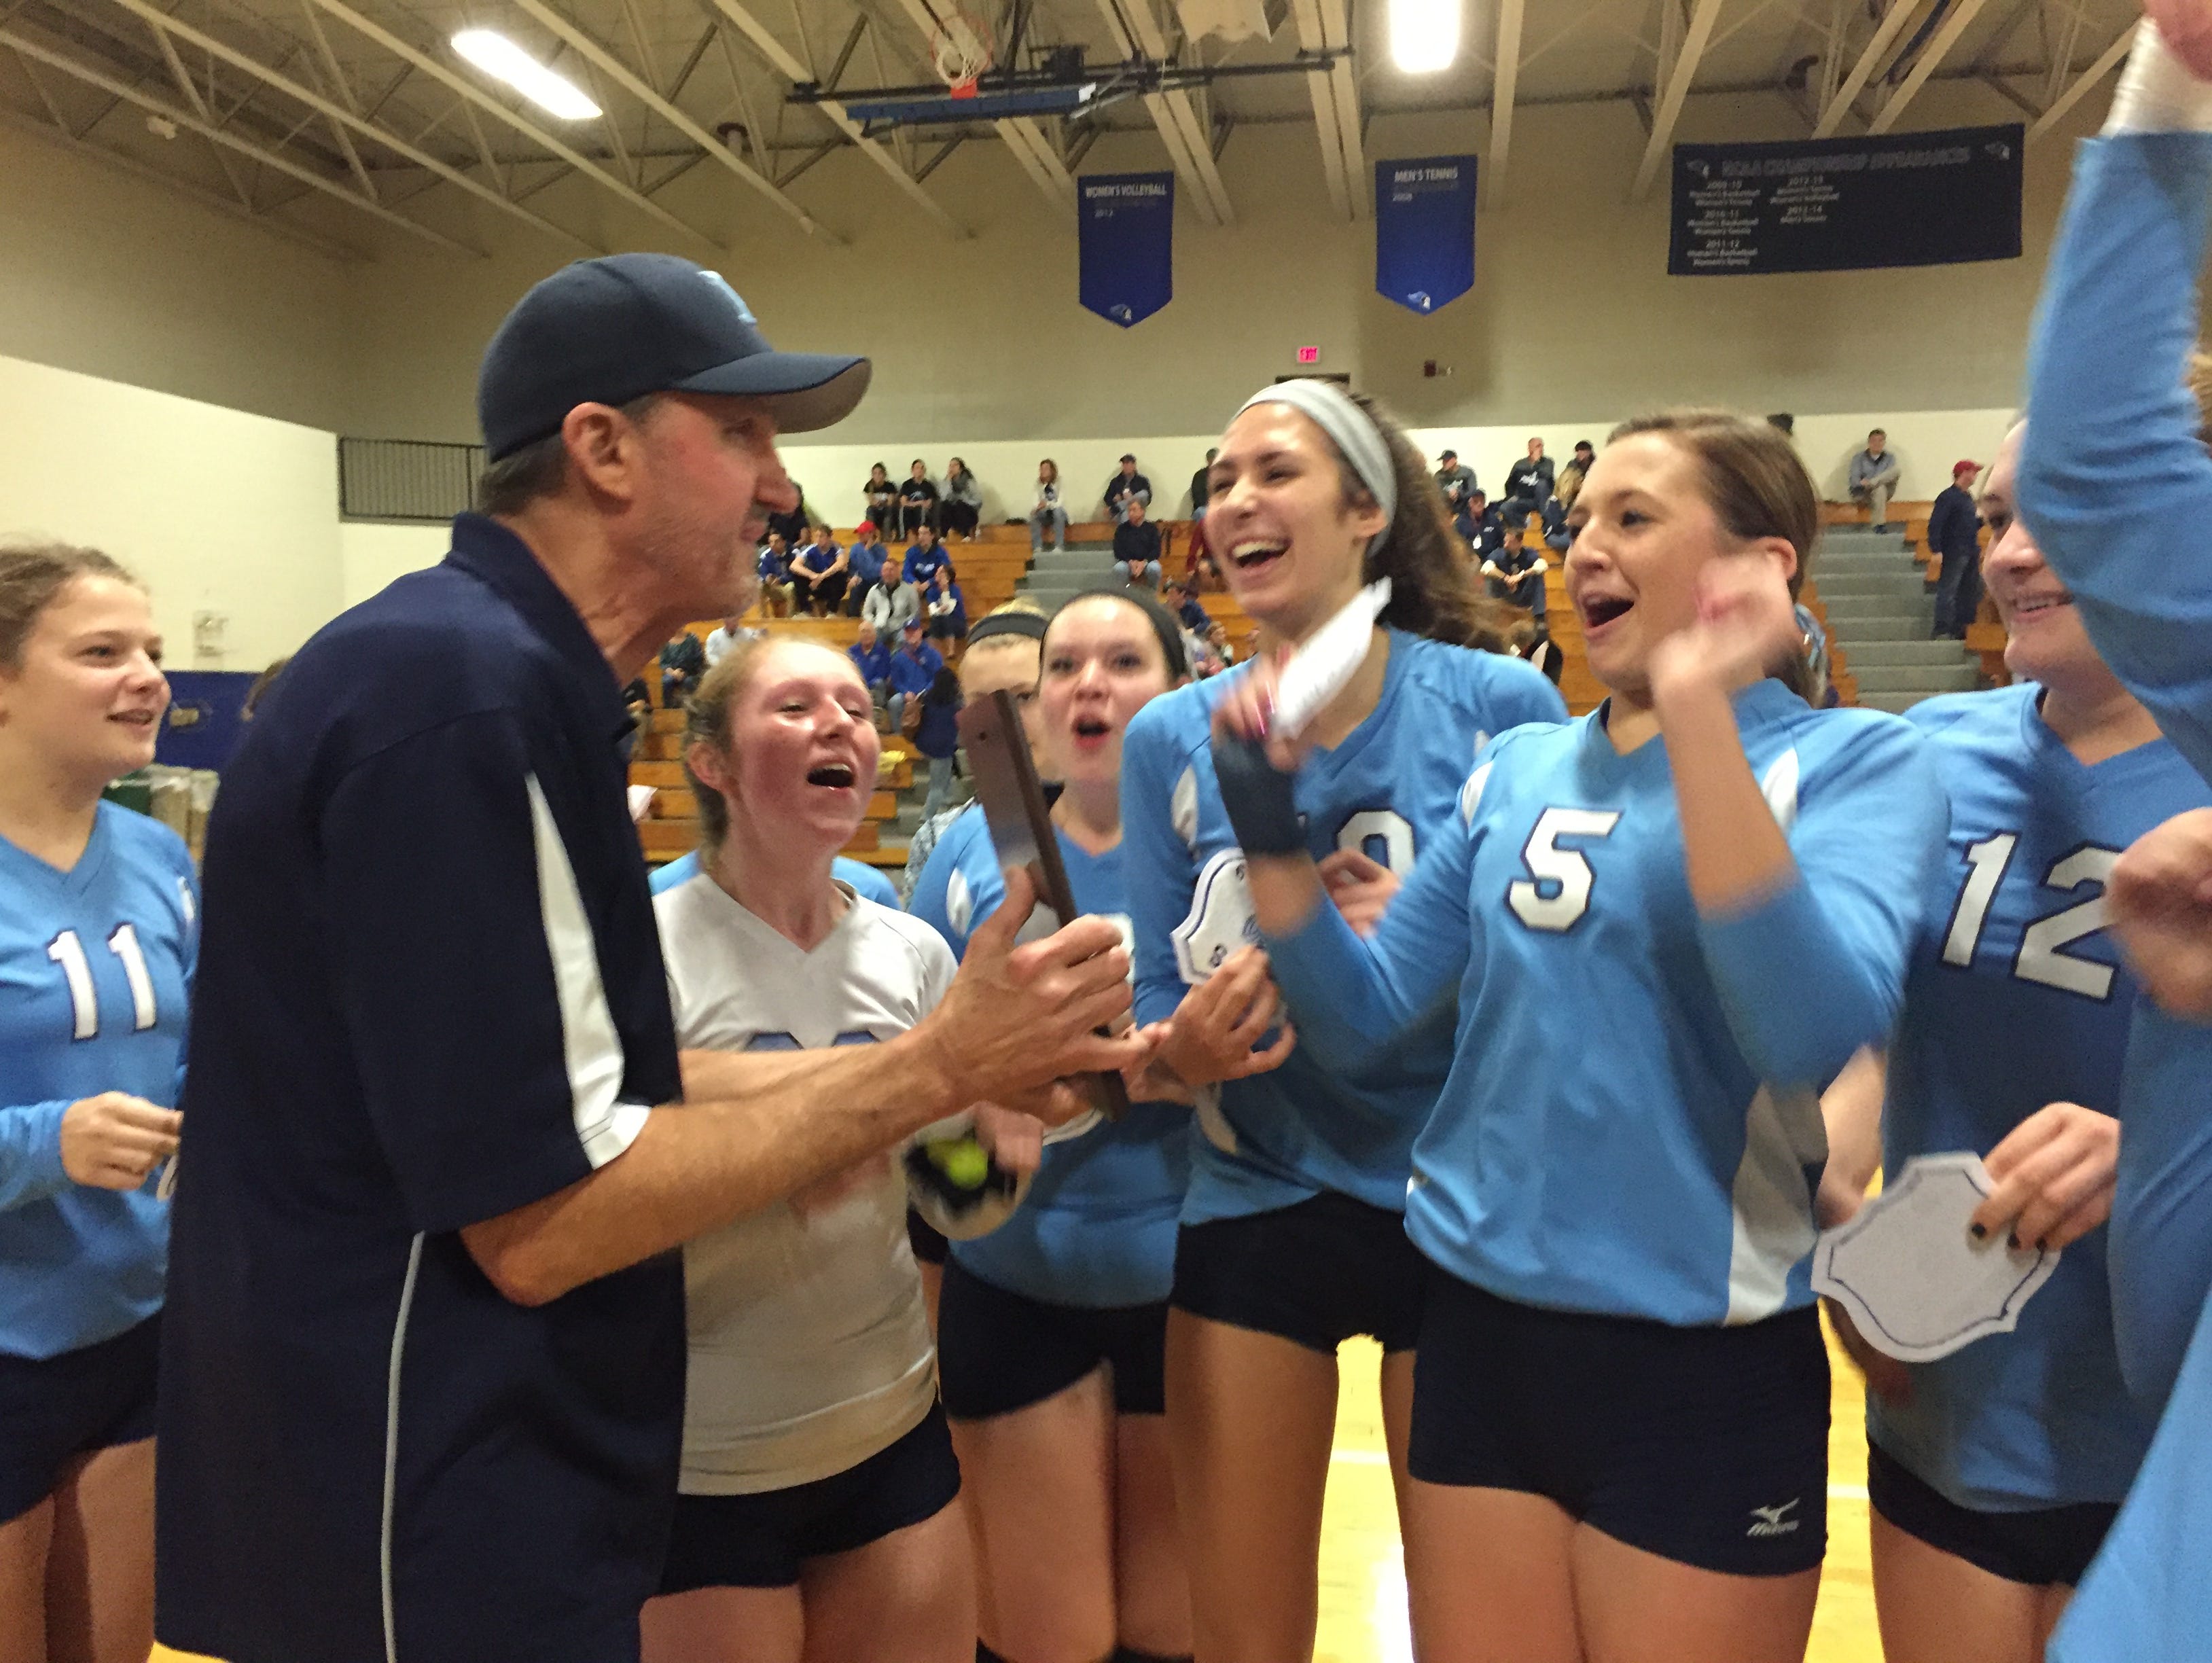 Pine Plains volleyball coach Larry Strickland, left, celebrates with his team after the Bombers won the Section 9 Class D title in Newburgh on Nov. 8, 2015.